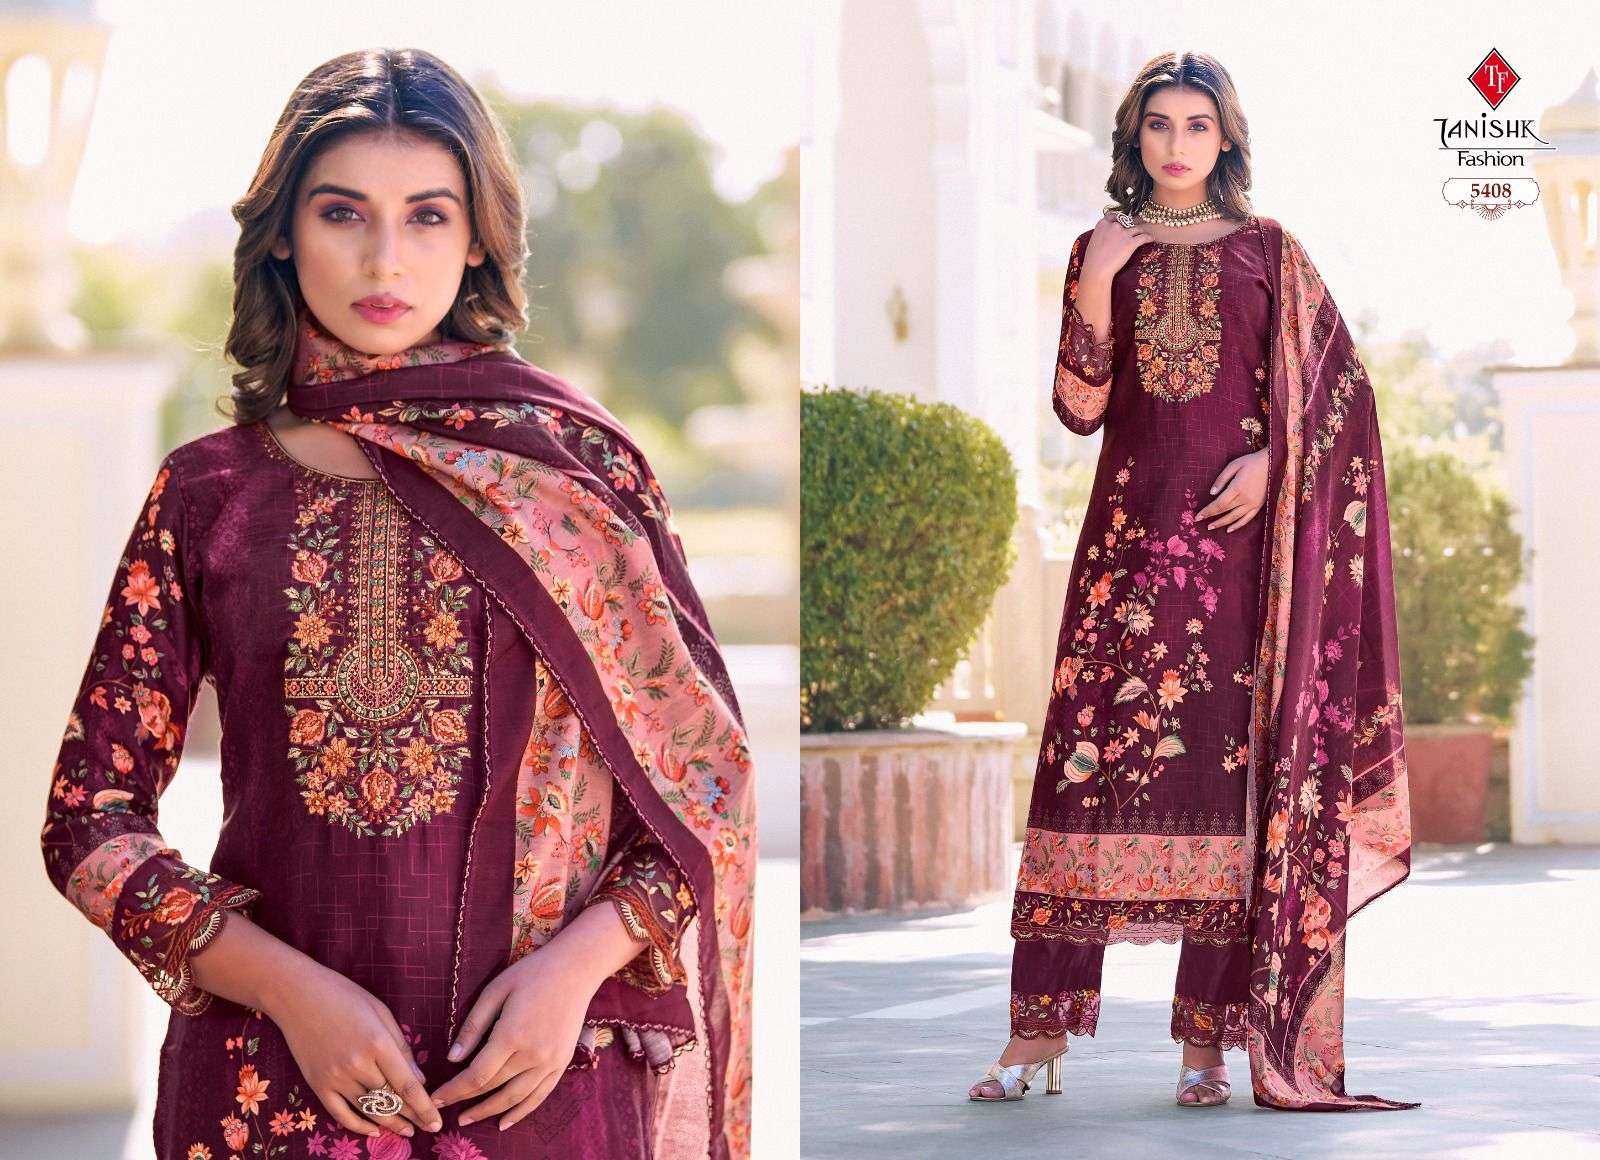 Ibadat By Tanishk Fashion 5401 To 5408 Beautiful Festive Suits Colorful Stylish Fancy Casual Wear & Ethnic Wear Cambric Cotton Print Dresses At Wholesale Price